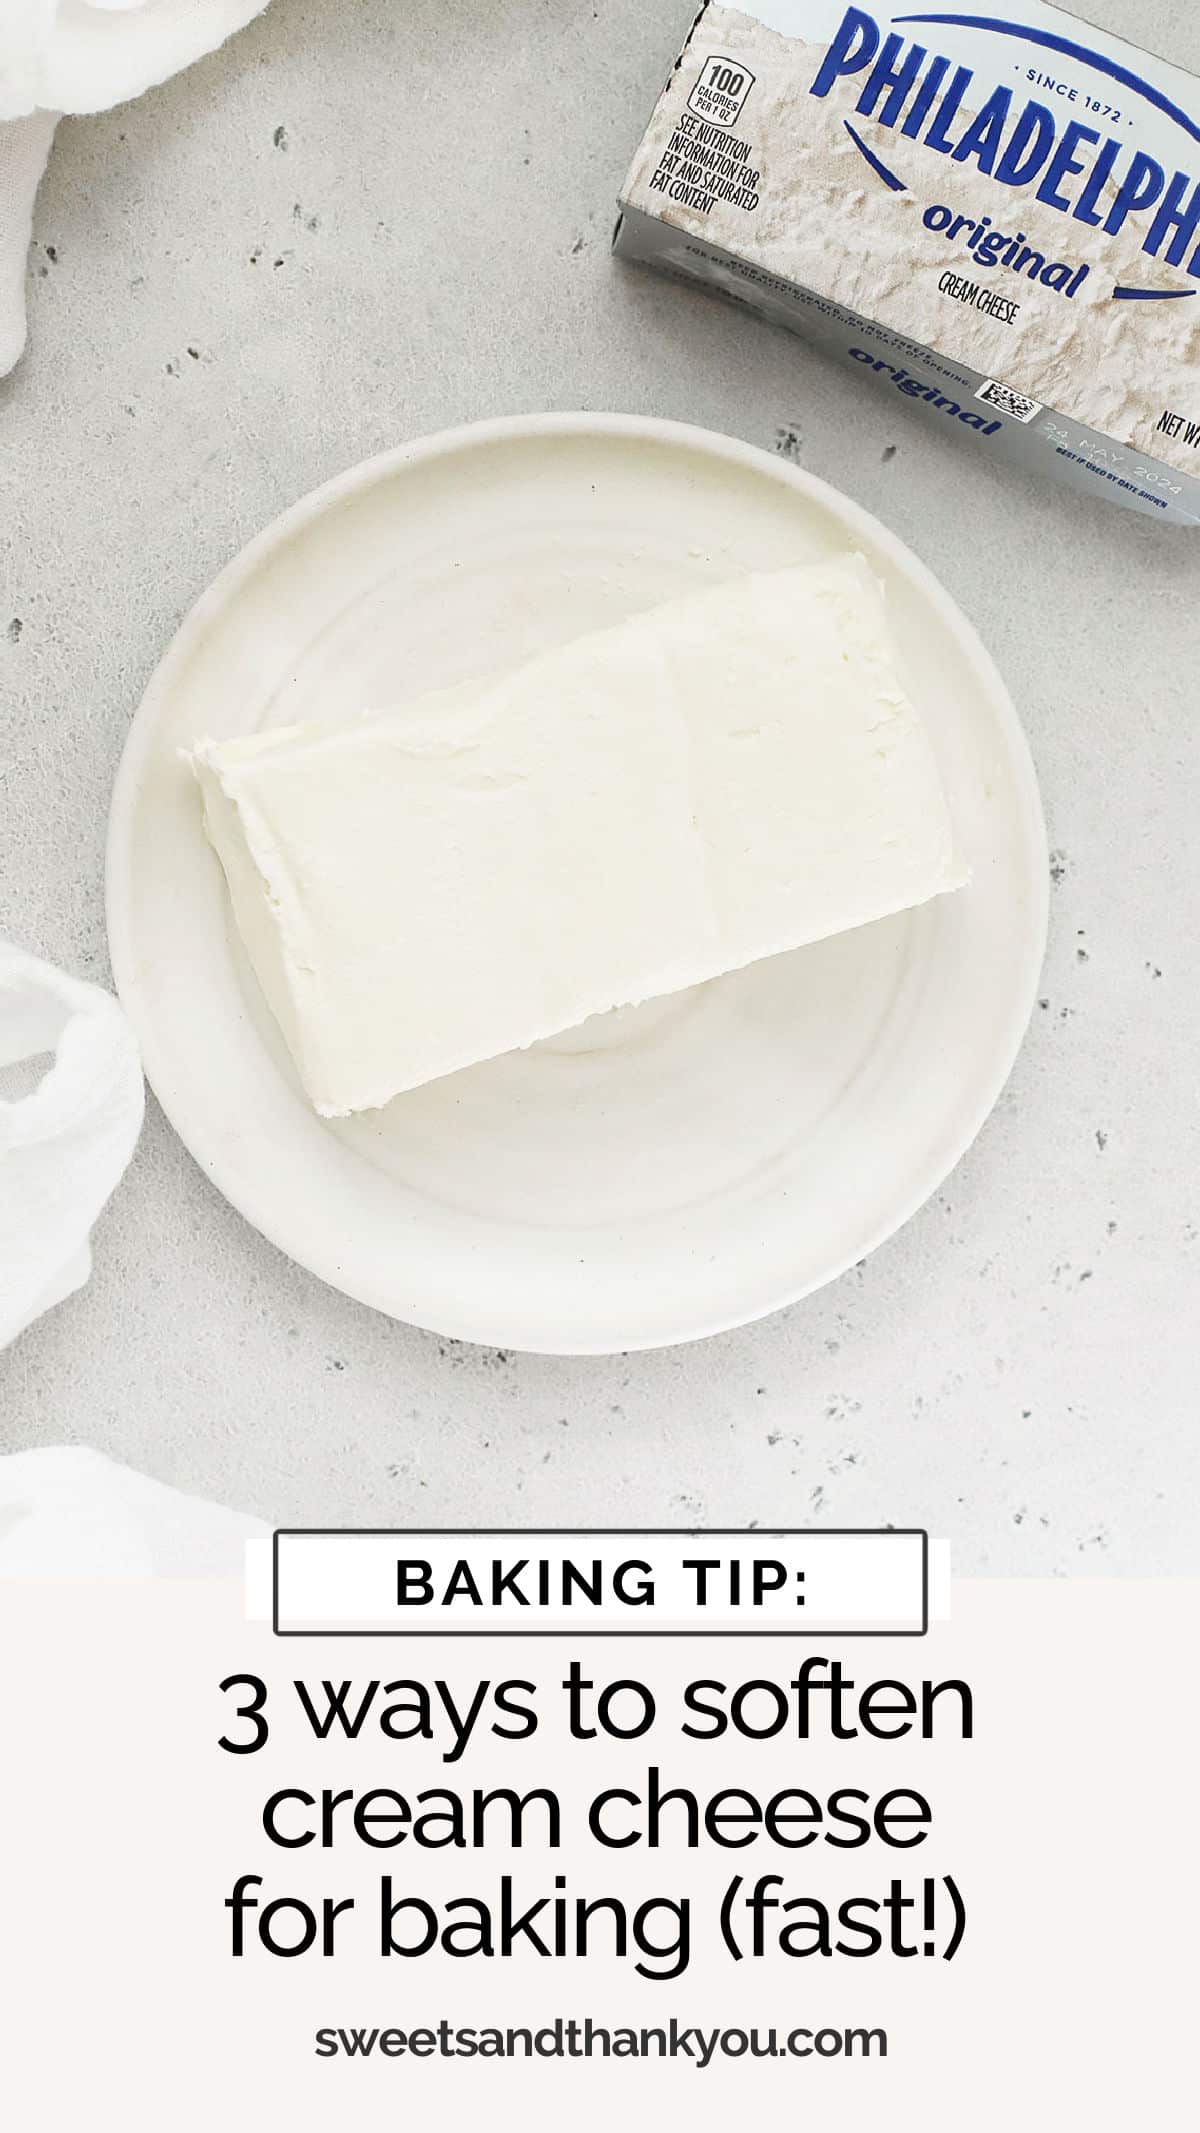 Softening cream cheese has never been easier! Learn 3 different tricks for softening cream cheese quickly. Perfect for making cheesecake, frosting, and more! We'll start with the easiest method (countertop), followed by cubing (faster), and then finish up with the fastest way to soften cream cheese (water method). With this quick baking tip, you'll be on your way to making cheesecake, frosting, and more in no time! 